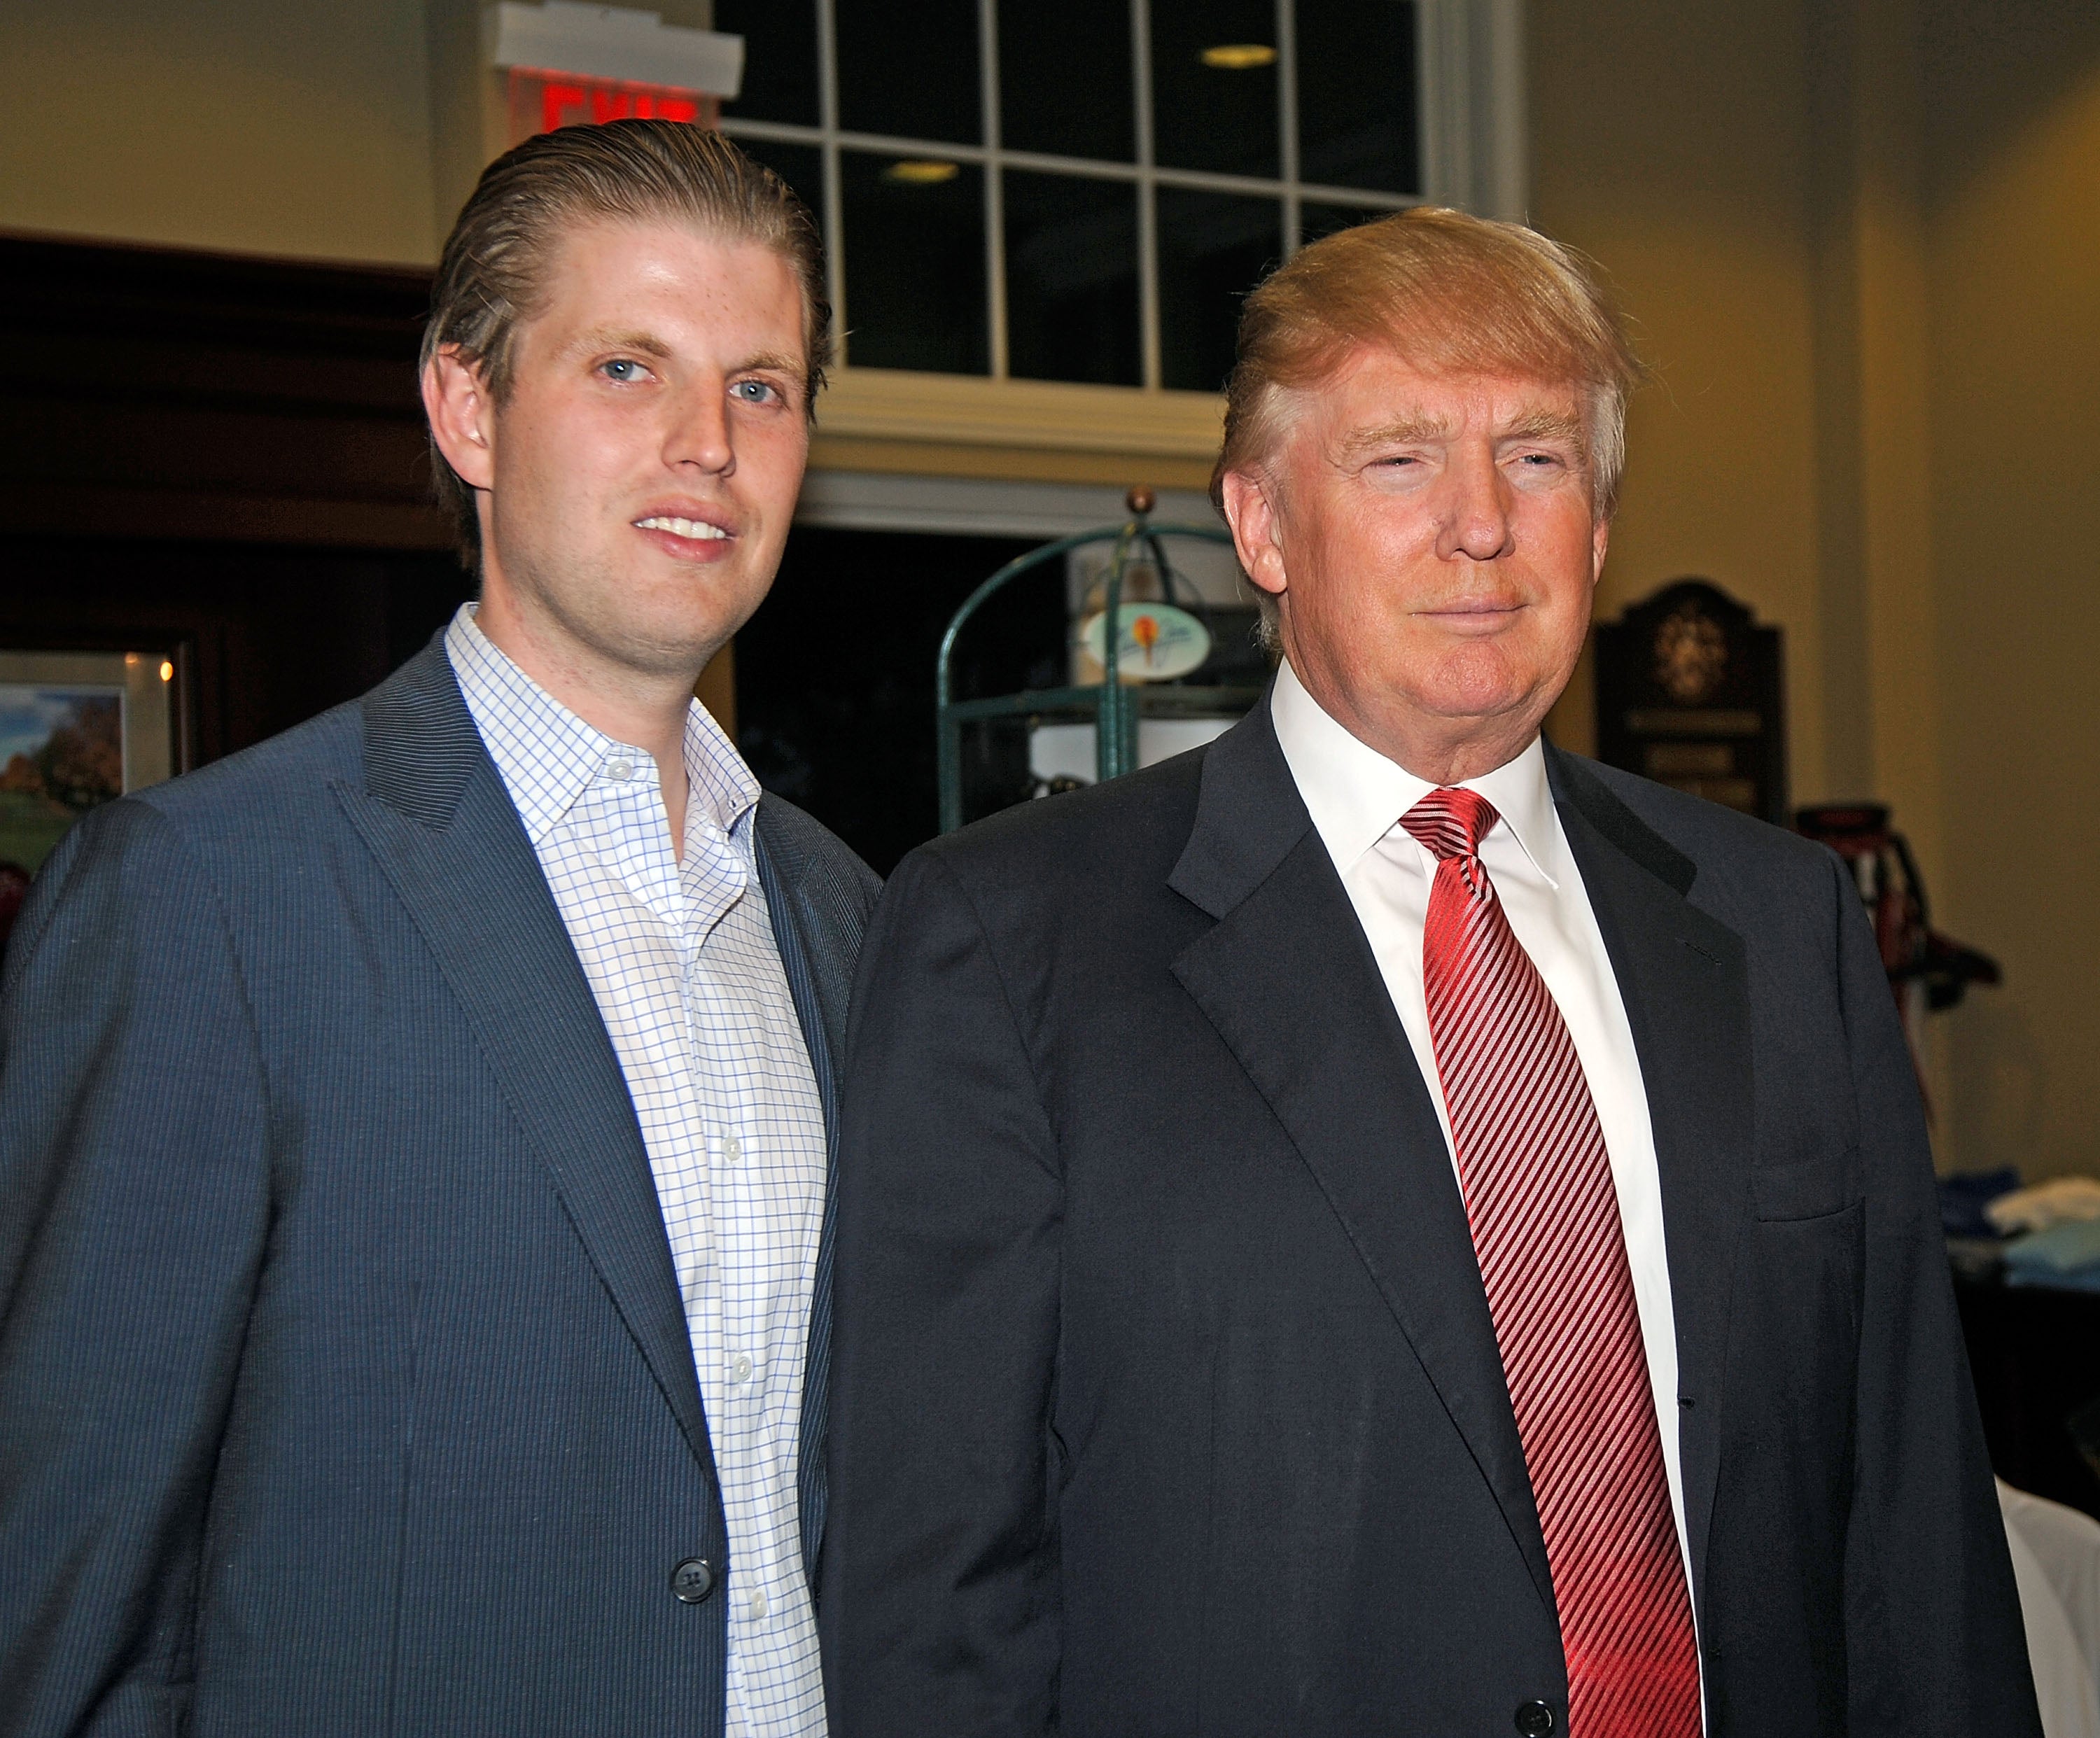 Donald & Eric Trump Couldn’t Help But Check Out Their Wives’ Ballots At The Polls
